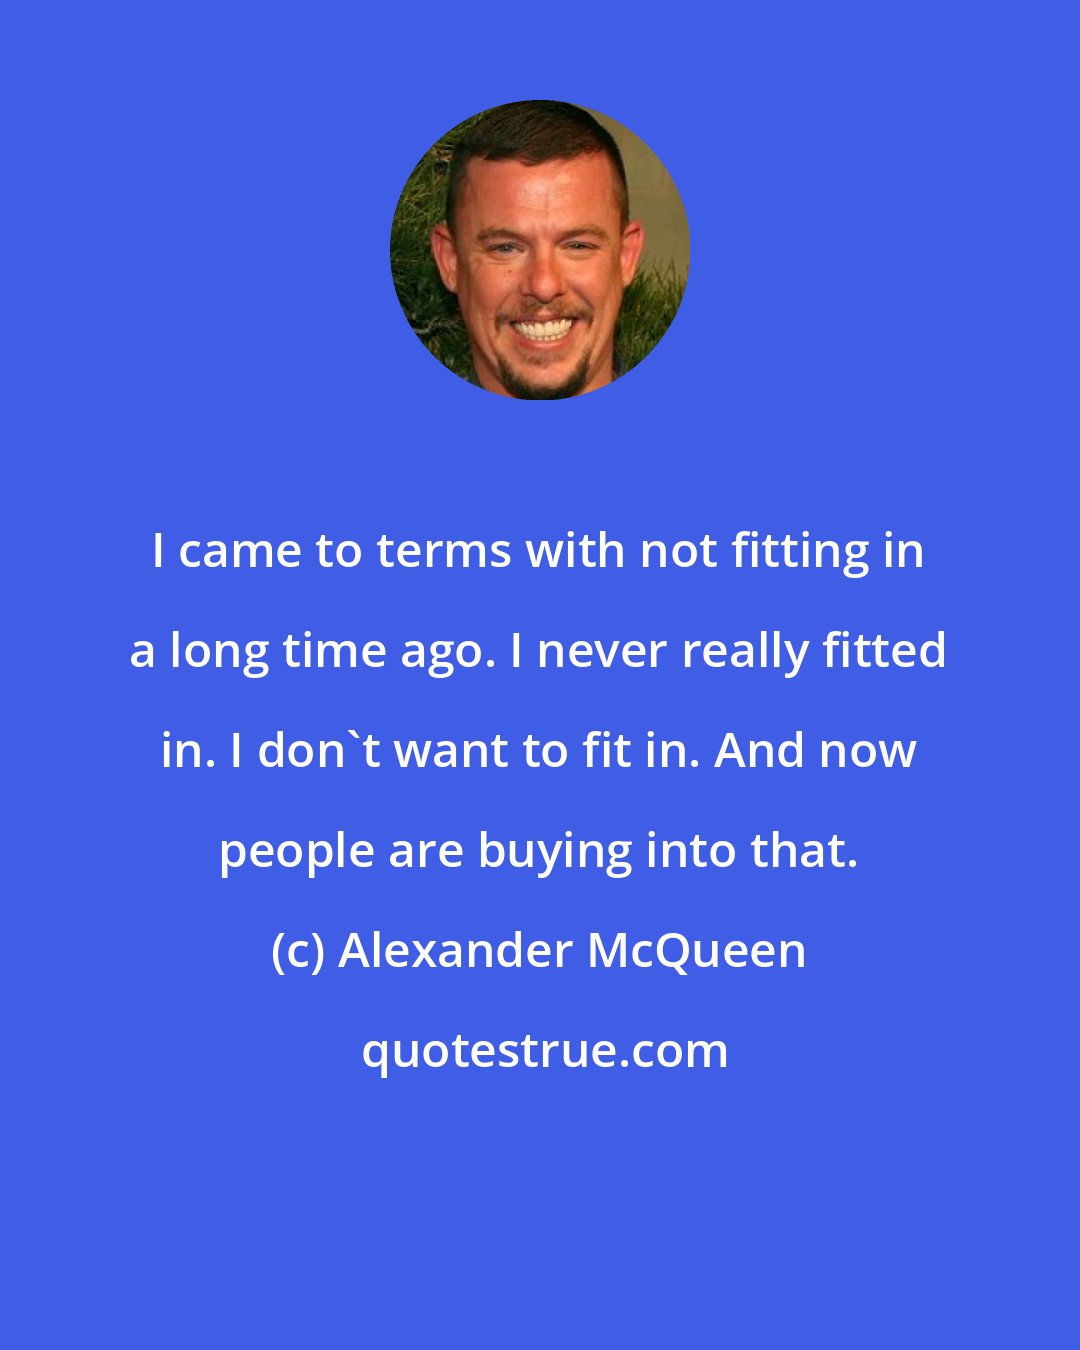 Alexander McQueen: I came to terms with not fitting in a long time ago. I never really fitted in. I don't want to fit in. And now people are buying into that.